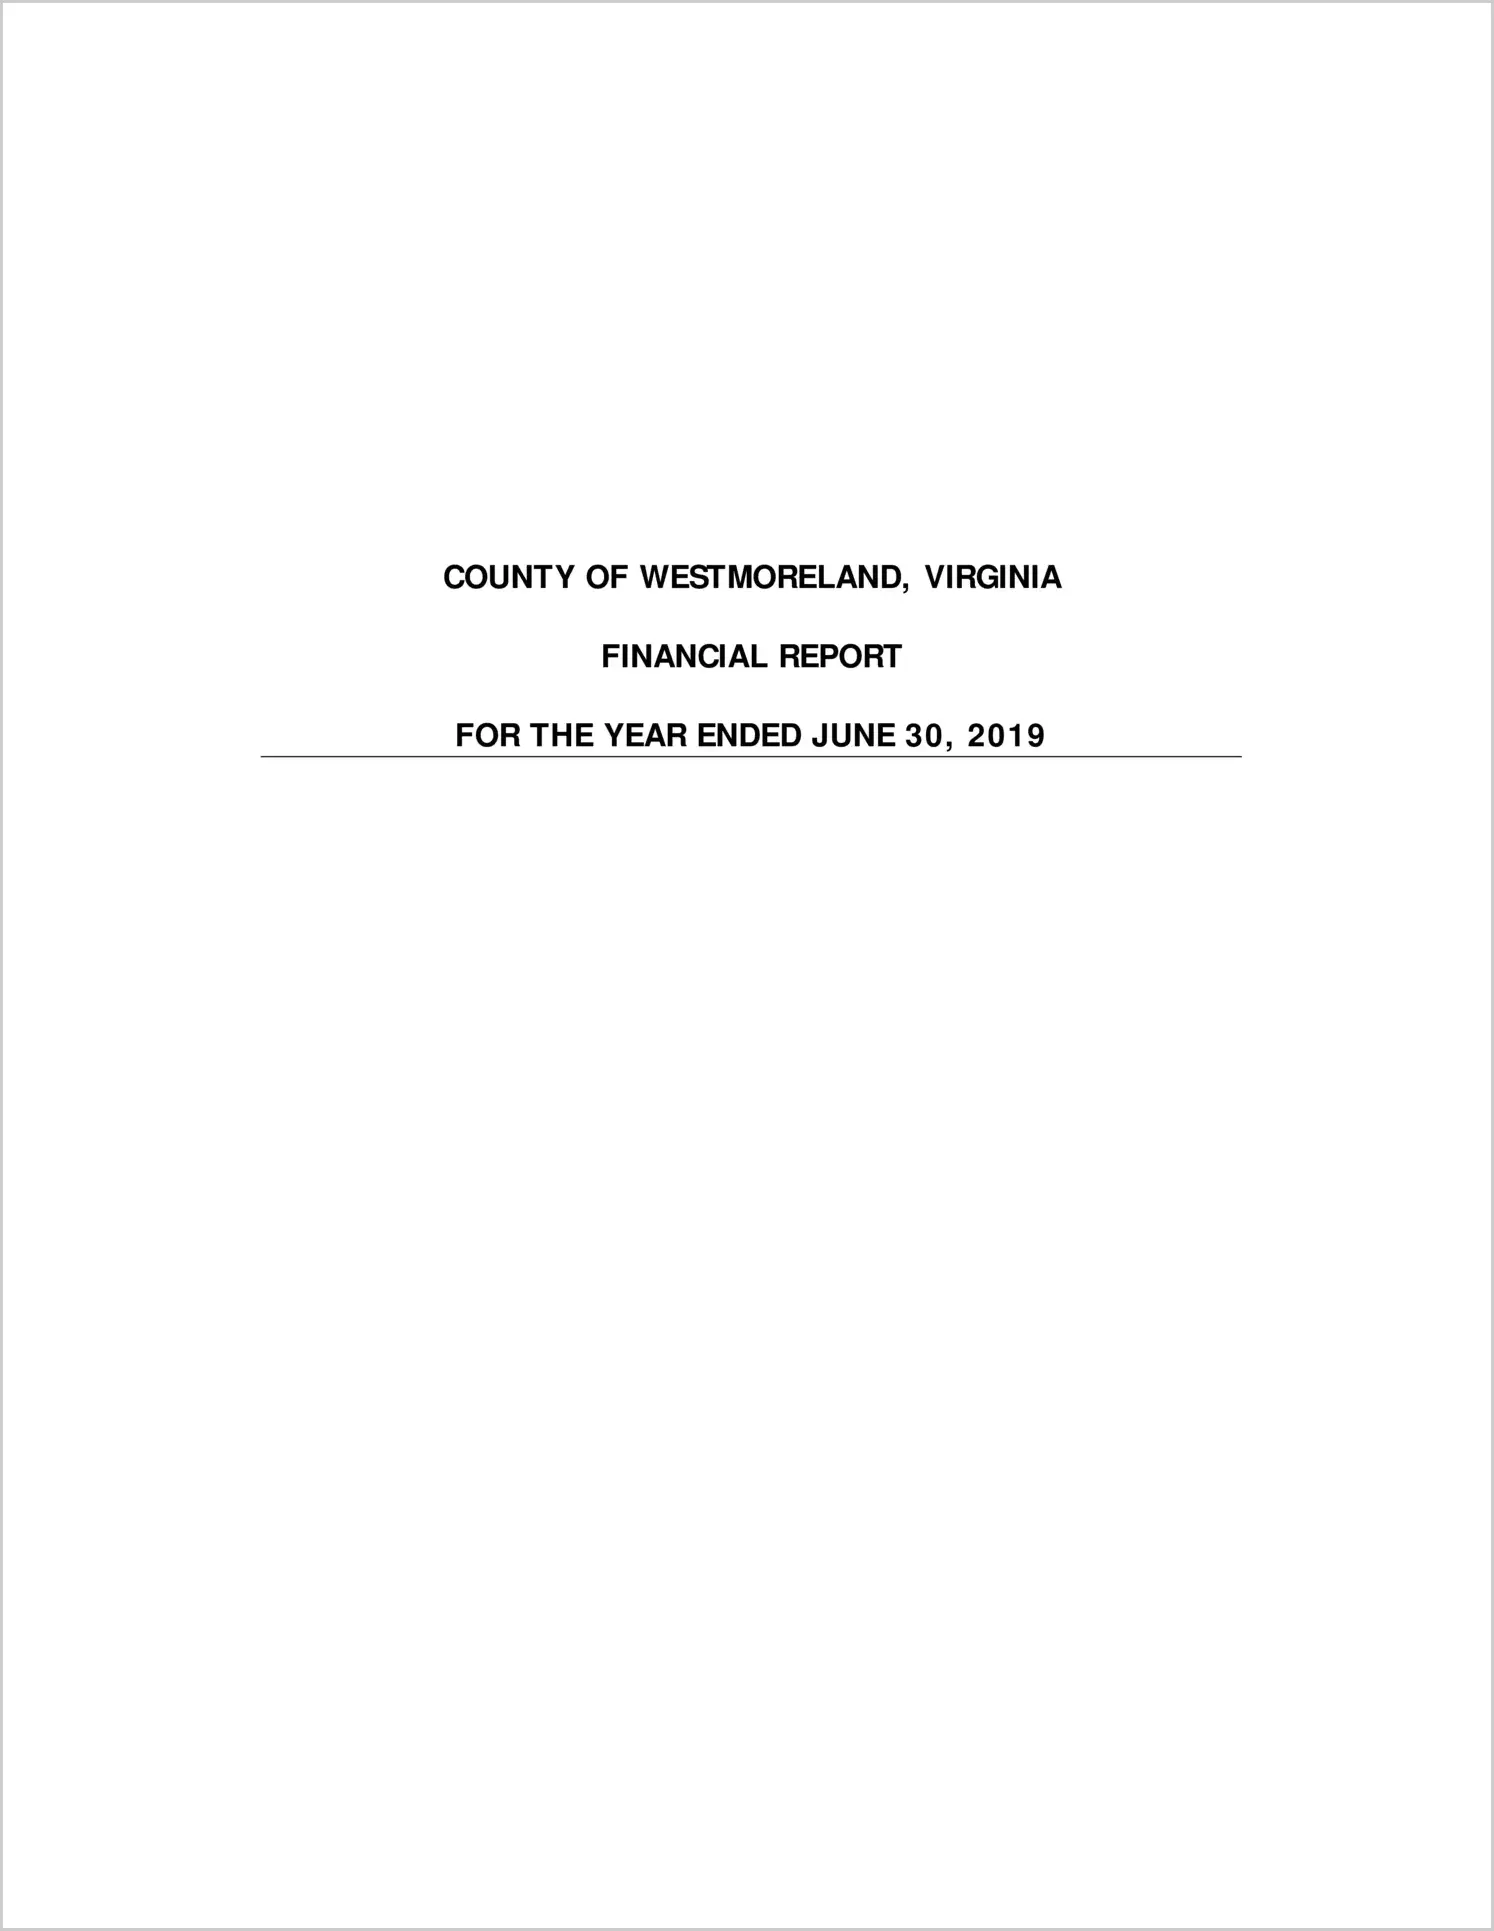 2019 Annual Financial Report for County of Westmoreland